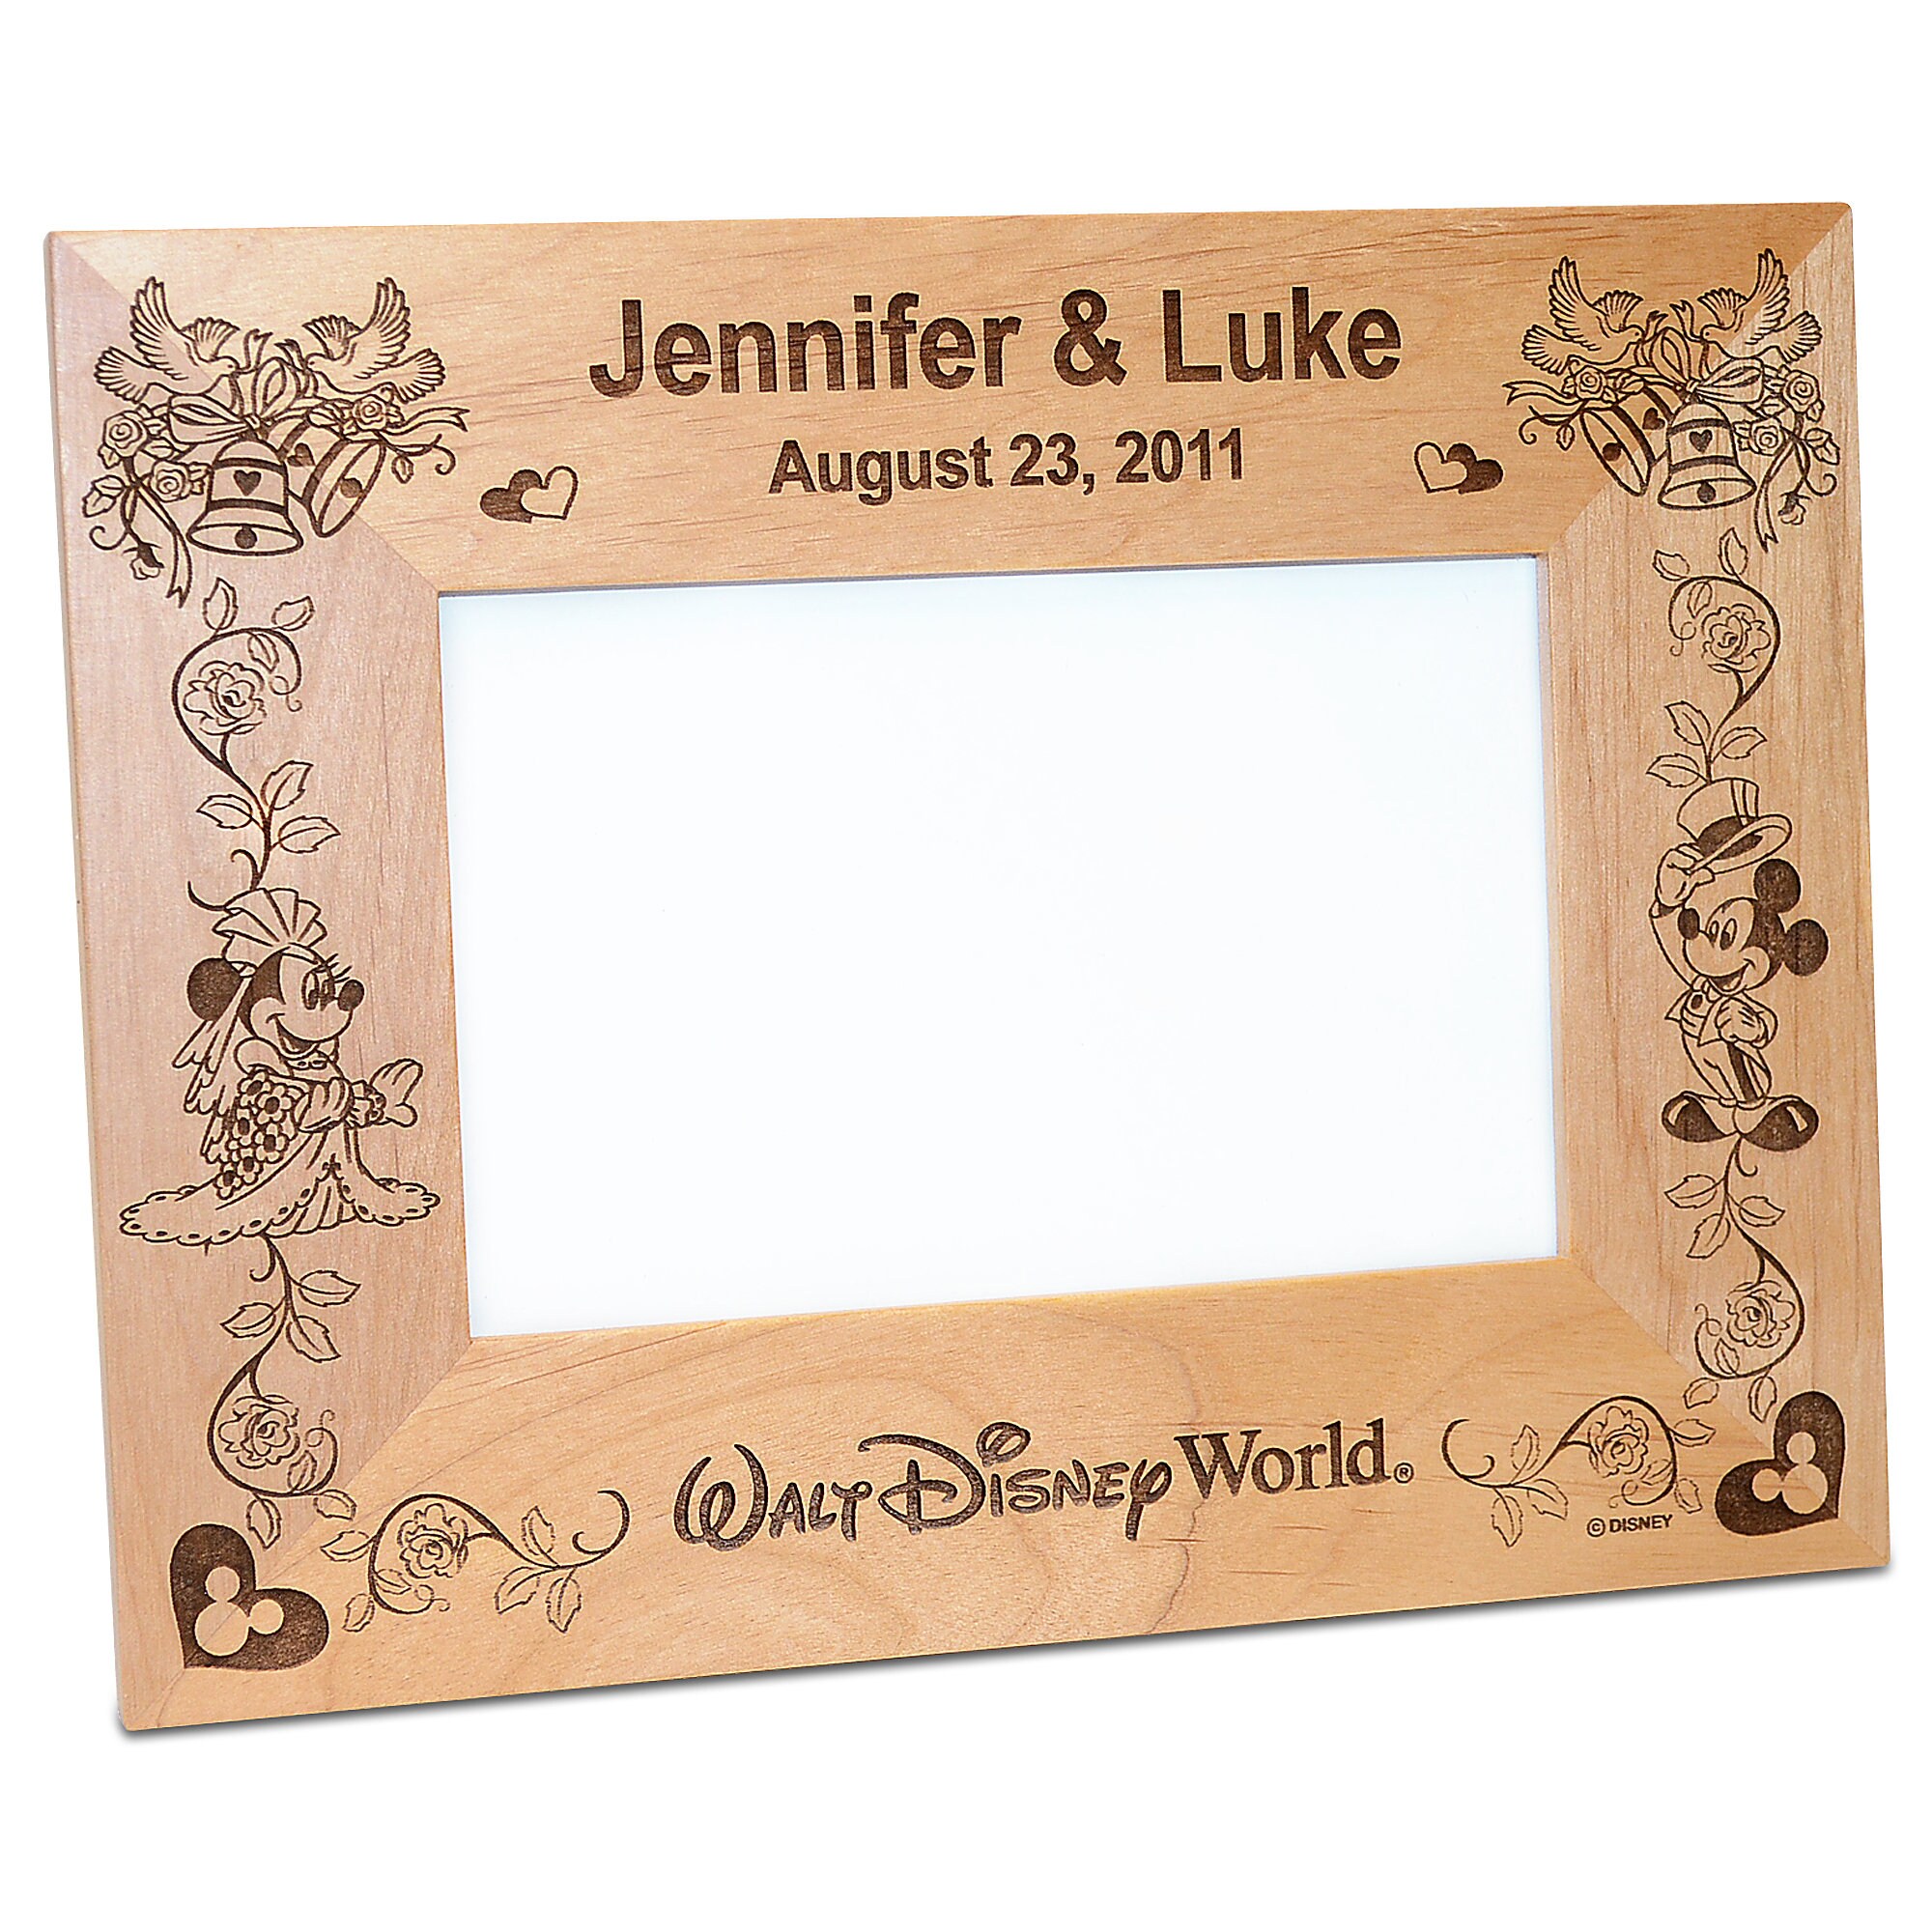 Walt Disney World Minnie and Mickey Mouse Wedding Photo Frame by Arribas - Personalizable